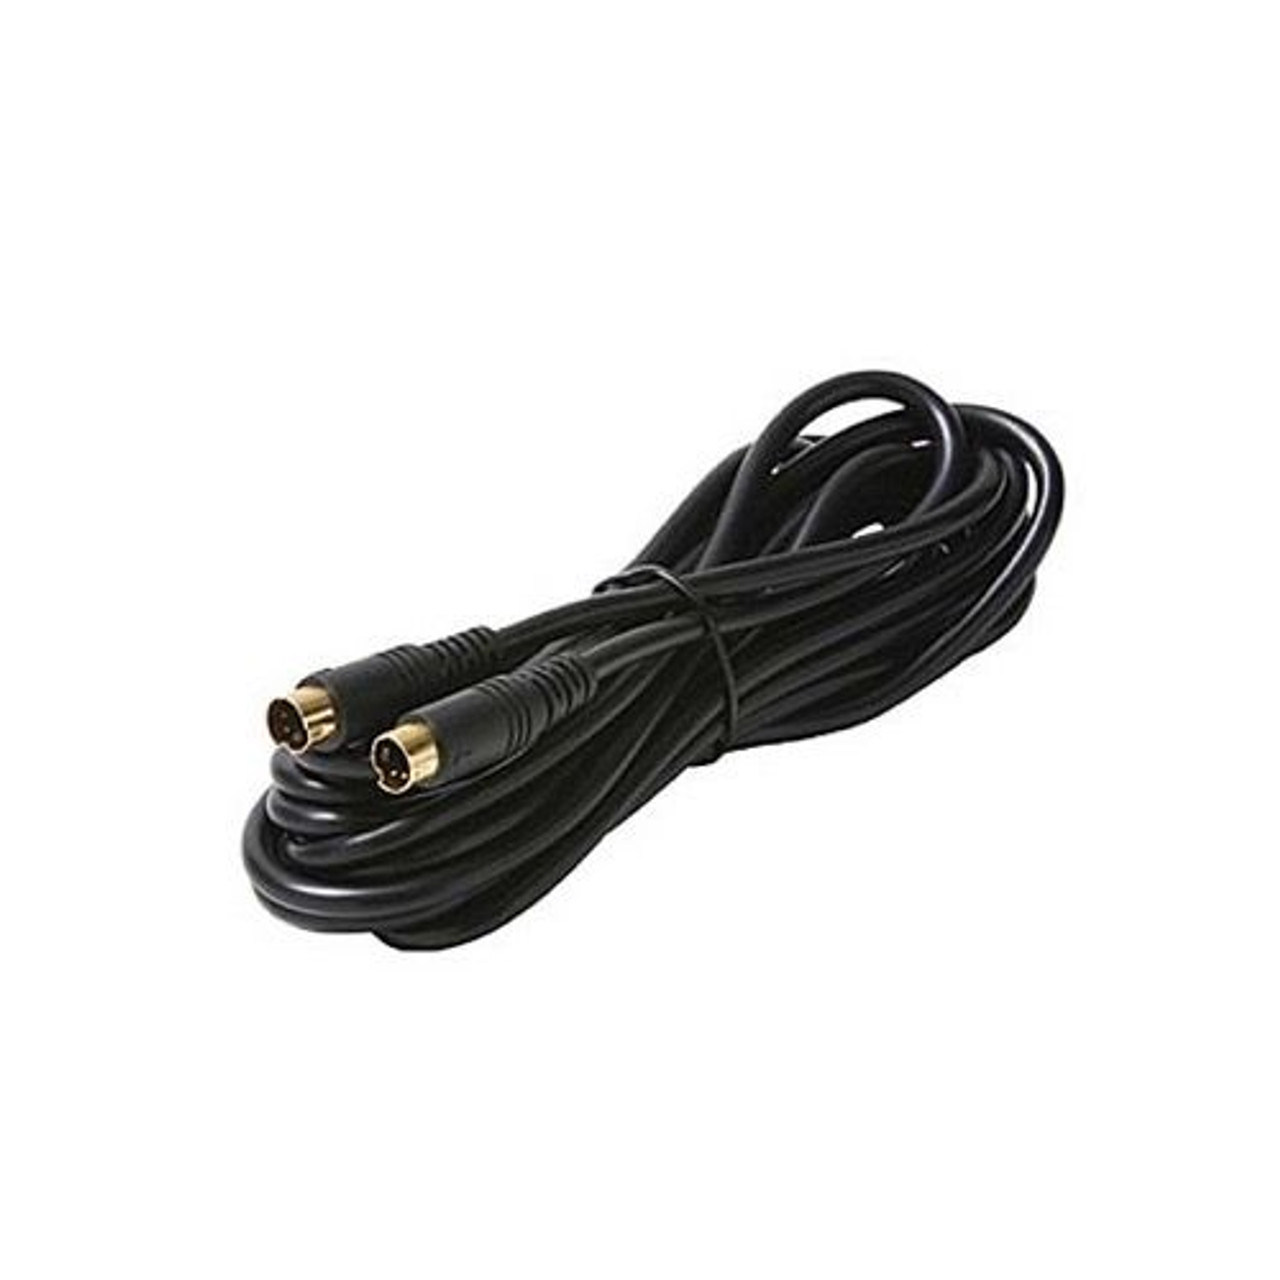 Eagle 25' FT S-Video Cable SVHS 4 Pin Male to Male Camcorder DVD VCR TV DSS Pro Grade Gold Plated Din Each Ends Shielded Digital Video Cable TV Connection Cord Premium Output Input Hook-Up Jacks